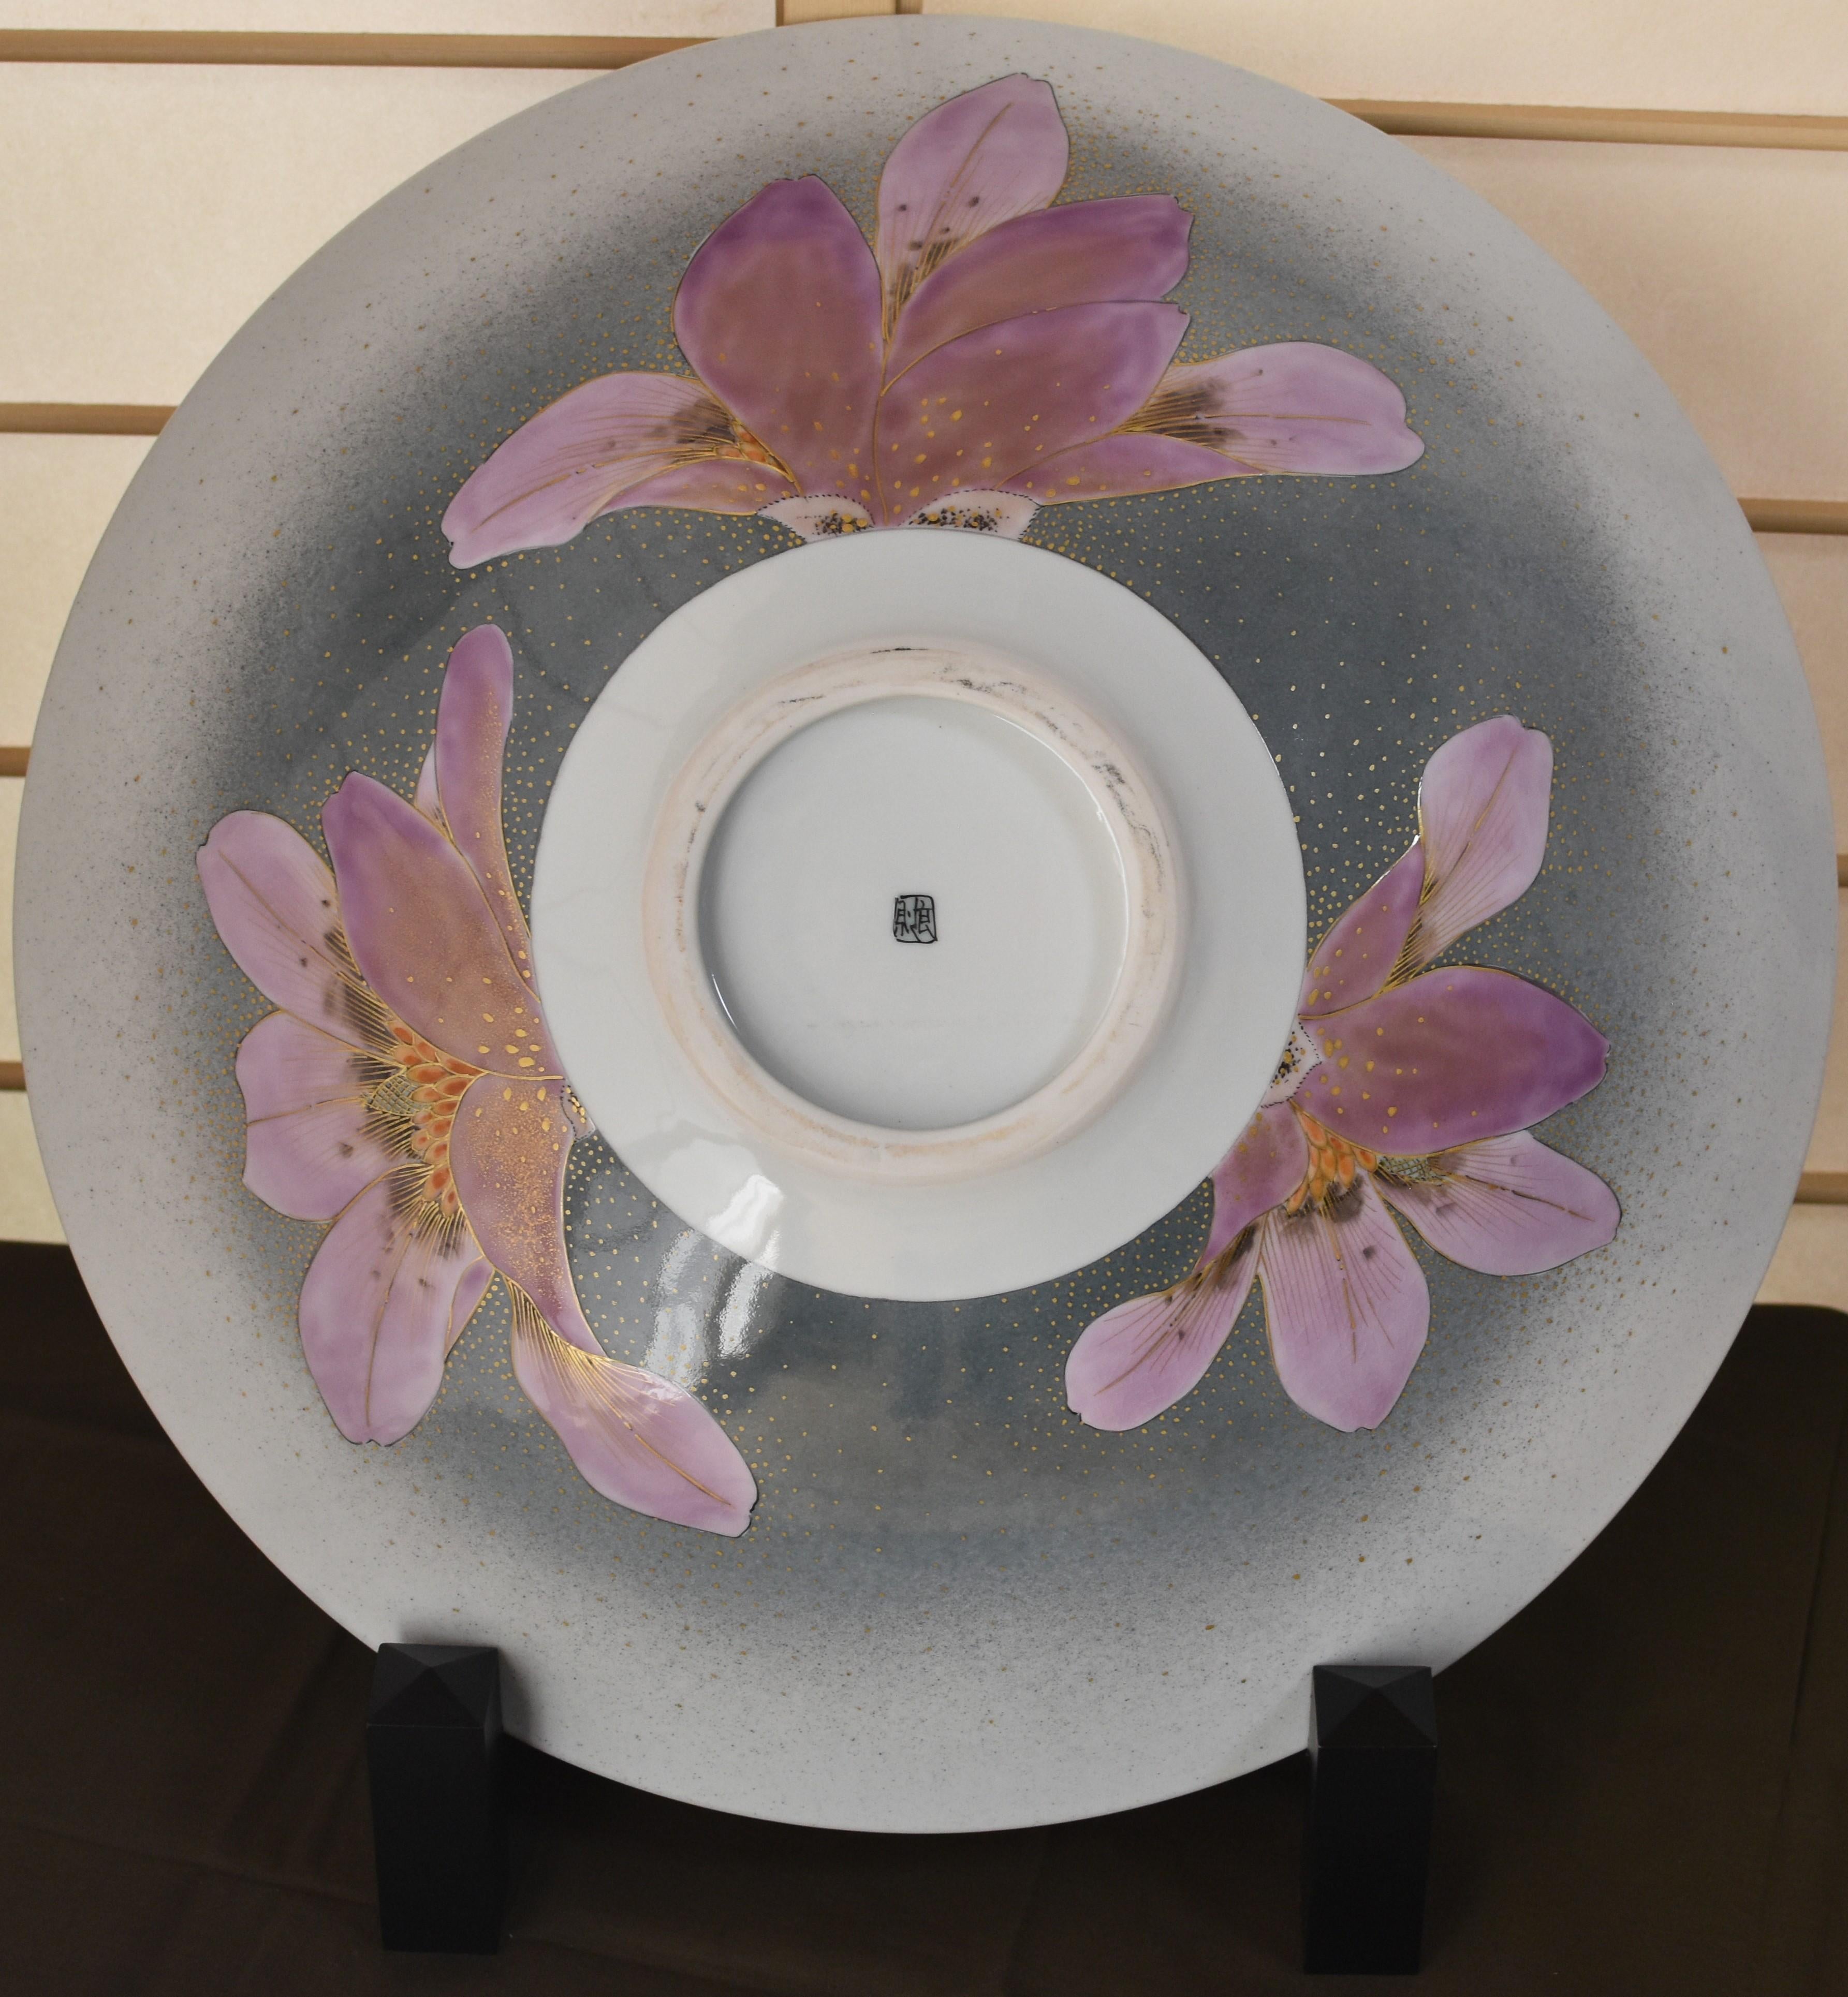 Breathtaking very large Japanese hand-painted contemporary decorative porcelain deep charger/centerpiece showcasing bold dramatic pink/purple magnolia flowers in full bloom on a beautiful background of stunning gradations in gray decorated with gold